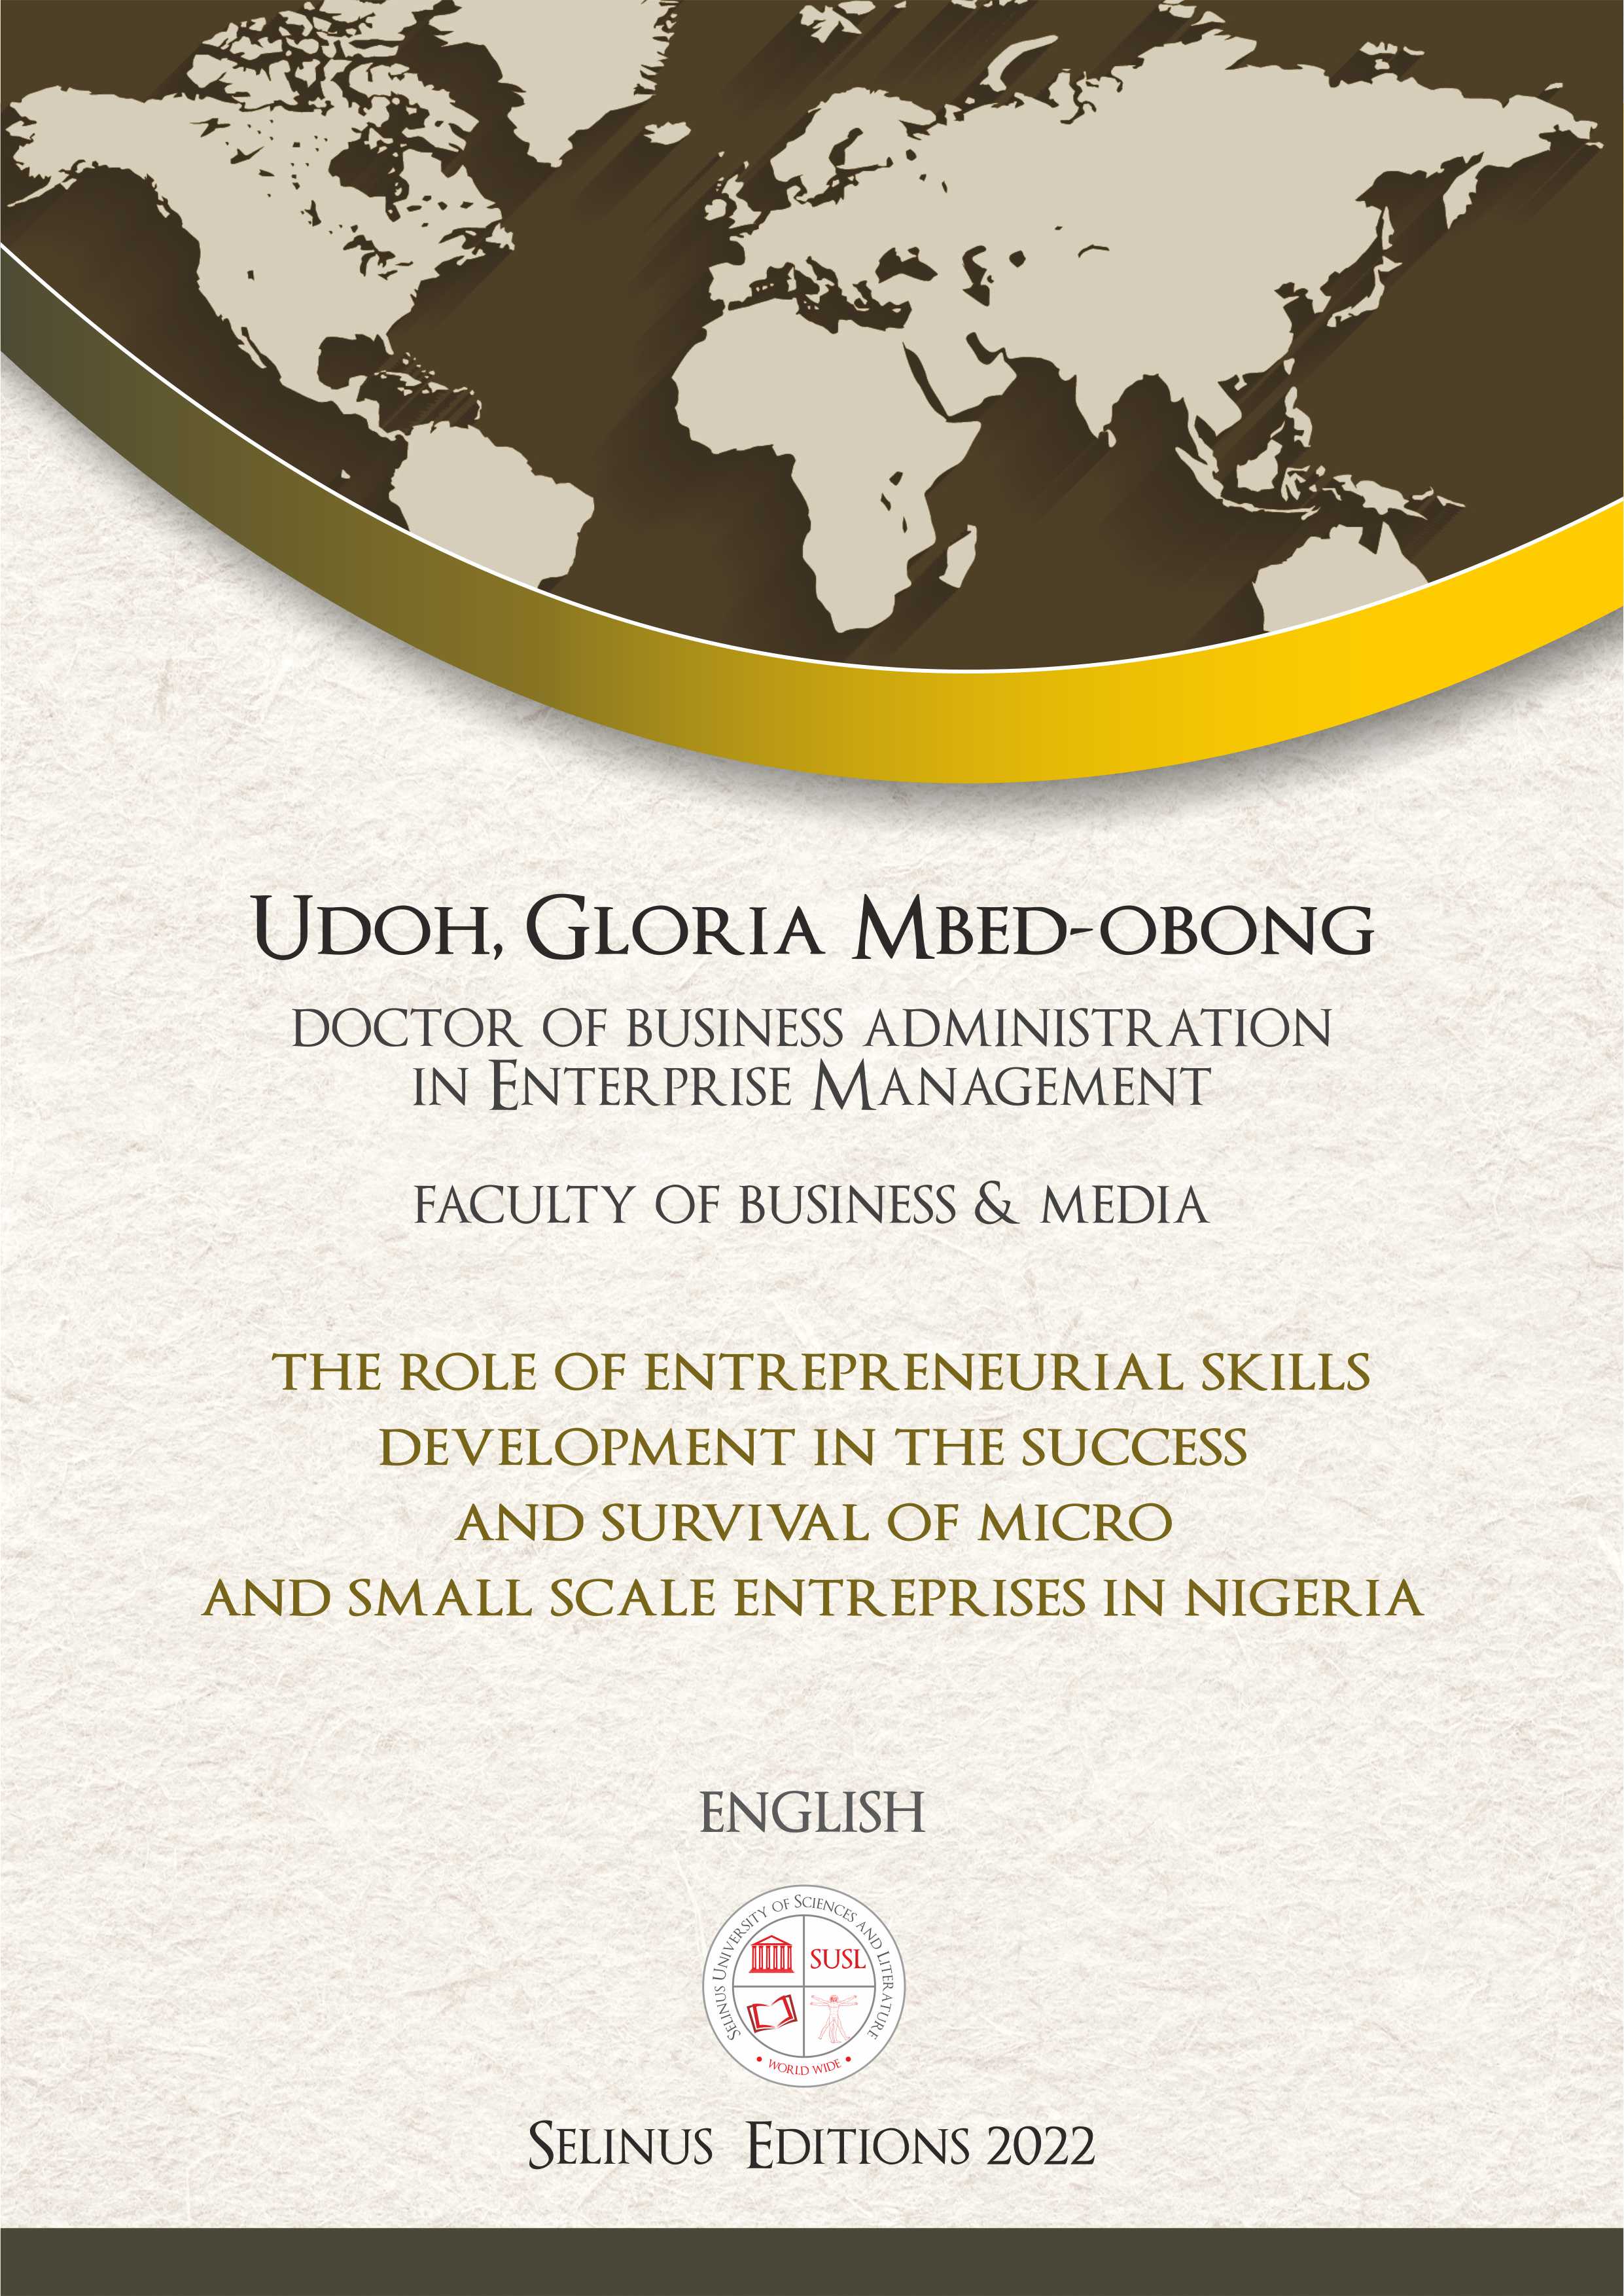 Thesis Udoh Gloria Mbed-Obong